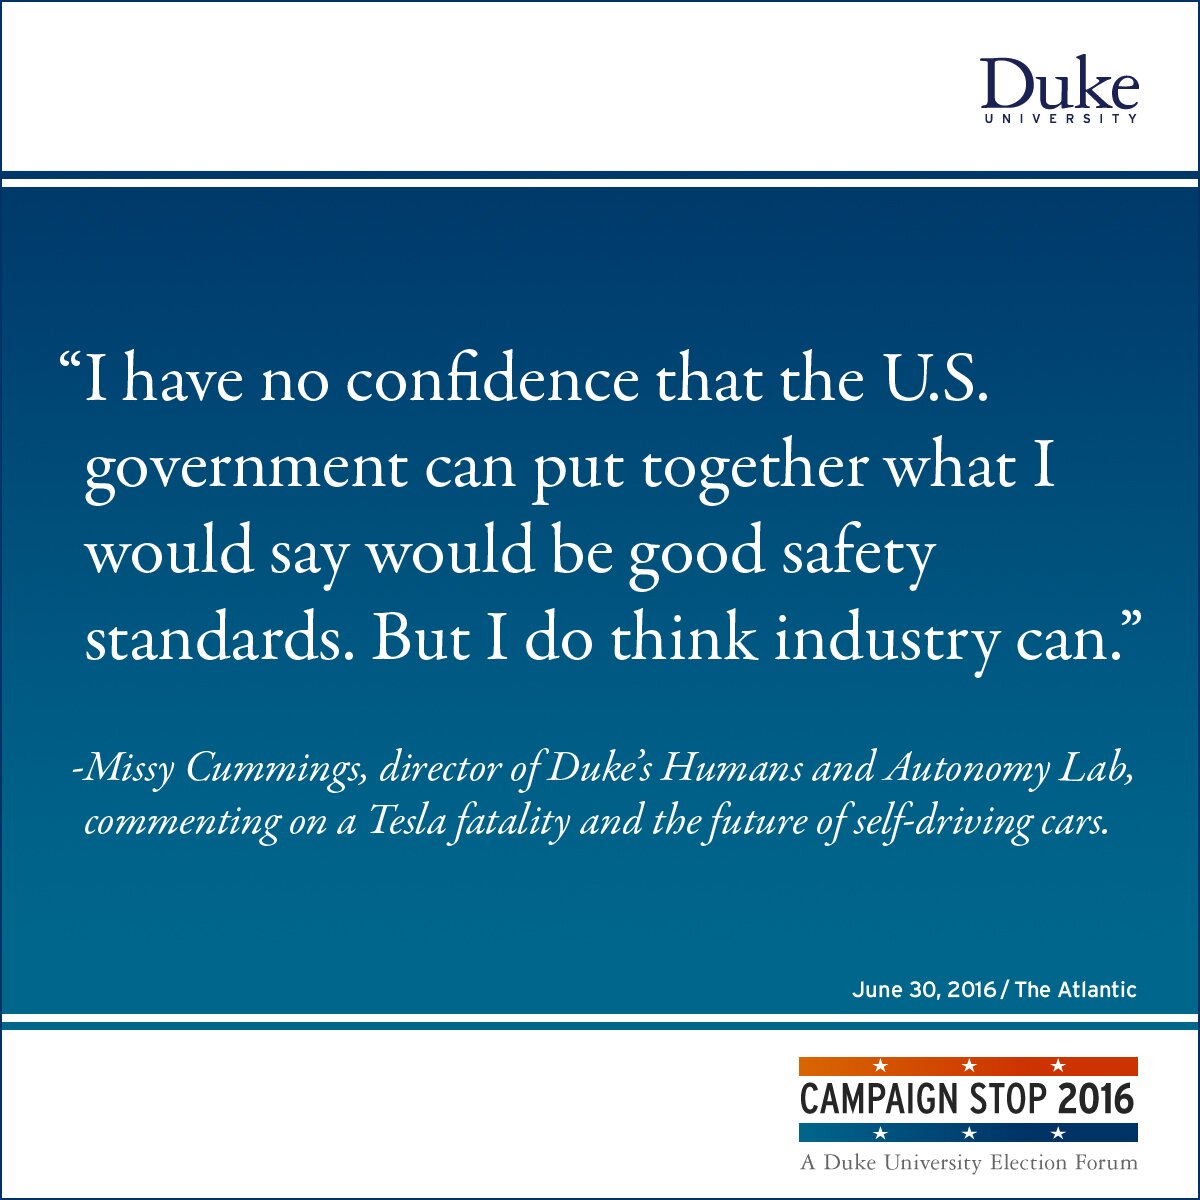 “I have no confidence that the U.S. government can put together what I would say would be good safety standards. But I do think industry can.” -Missy Cummings, director of Duke’s Humans and Autonomy Lab, commenting on a Tesla fatality and the future of self-driving cars.